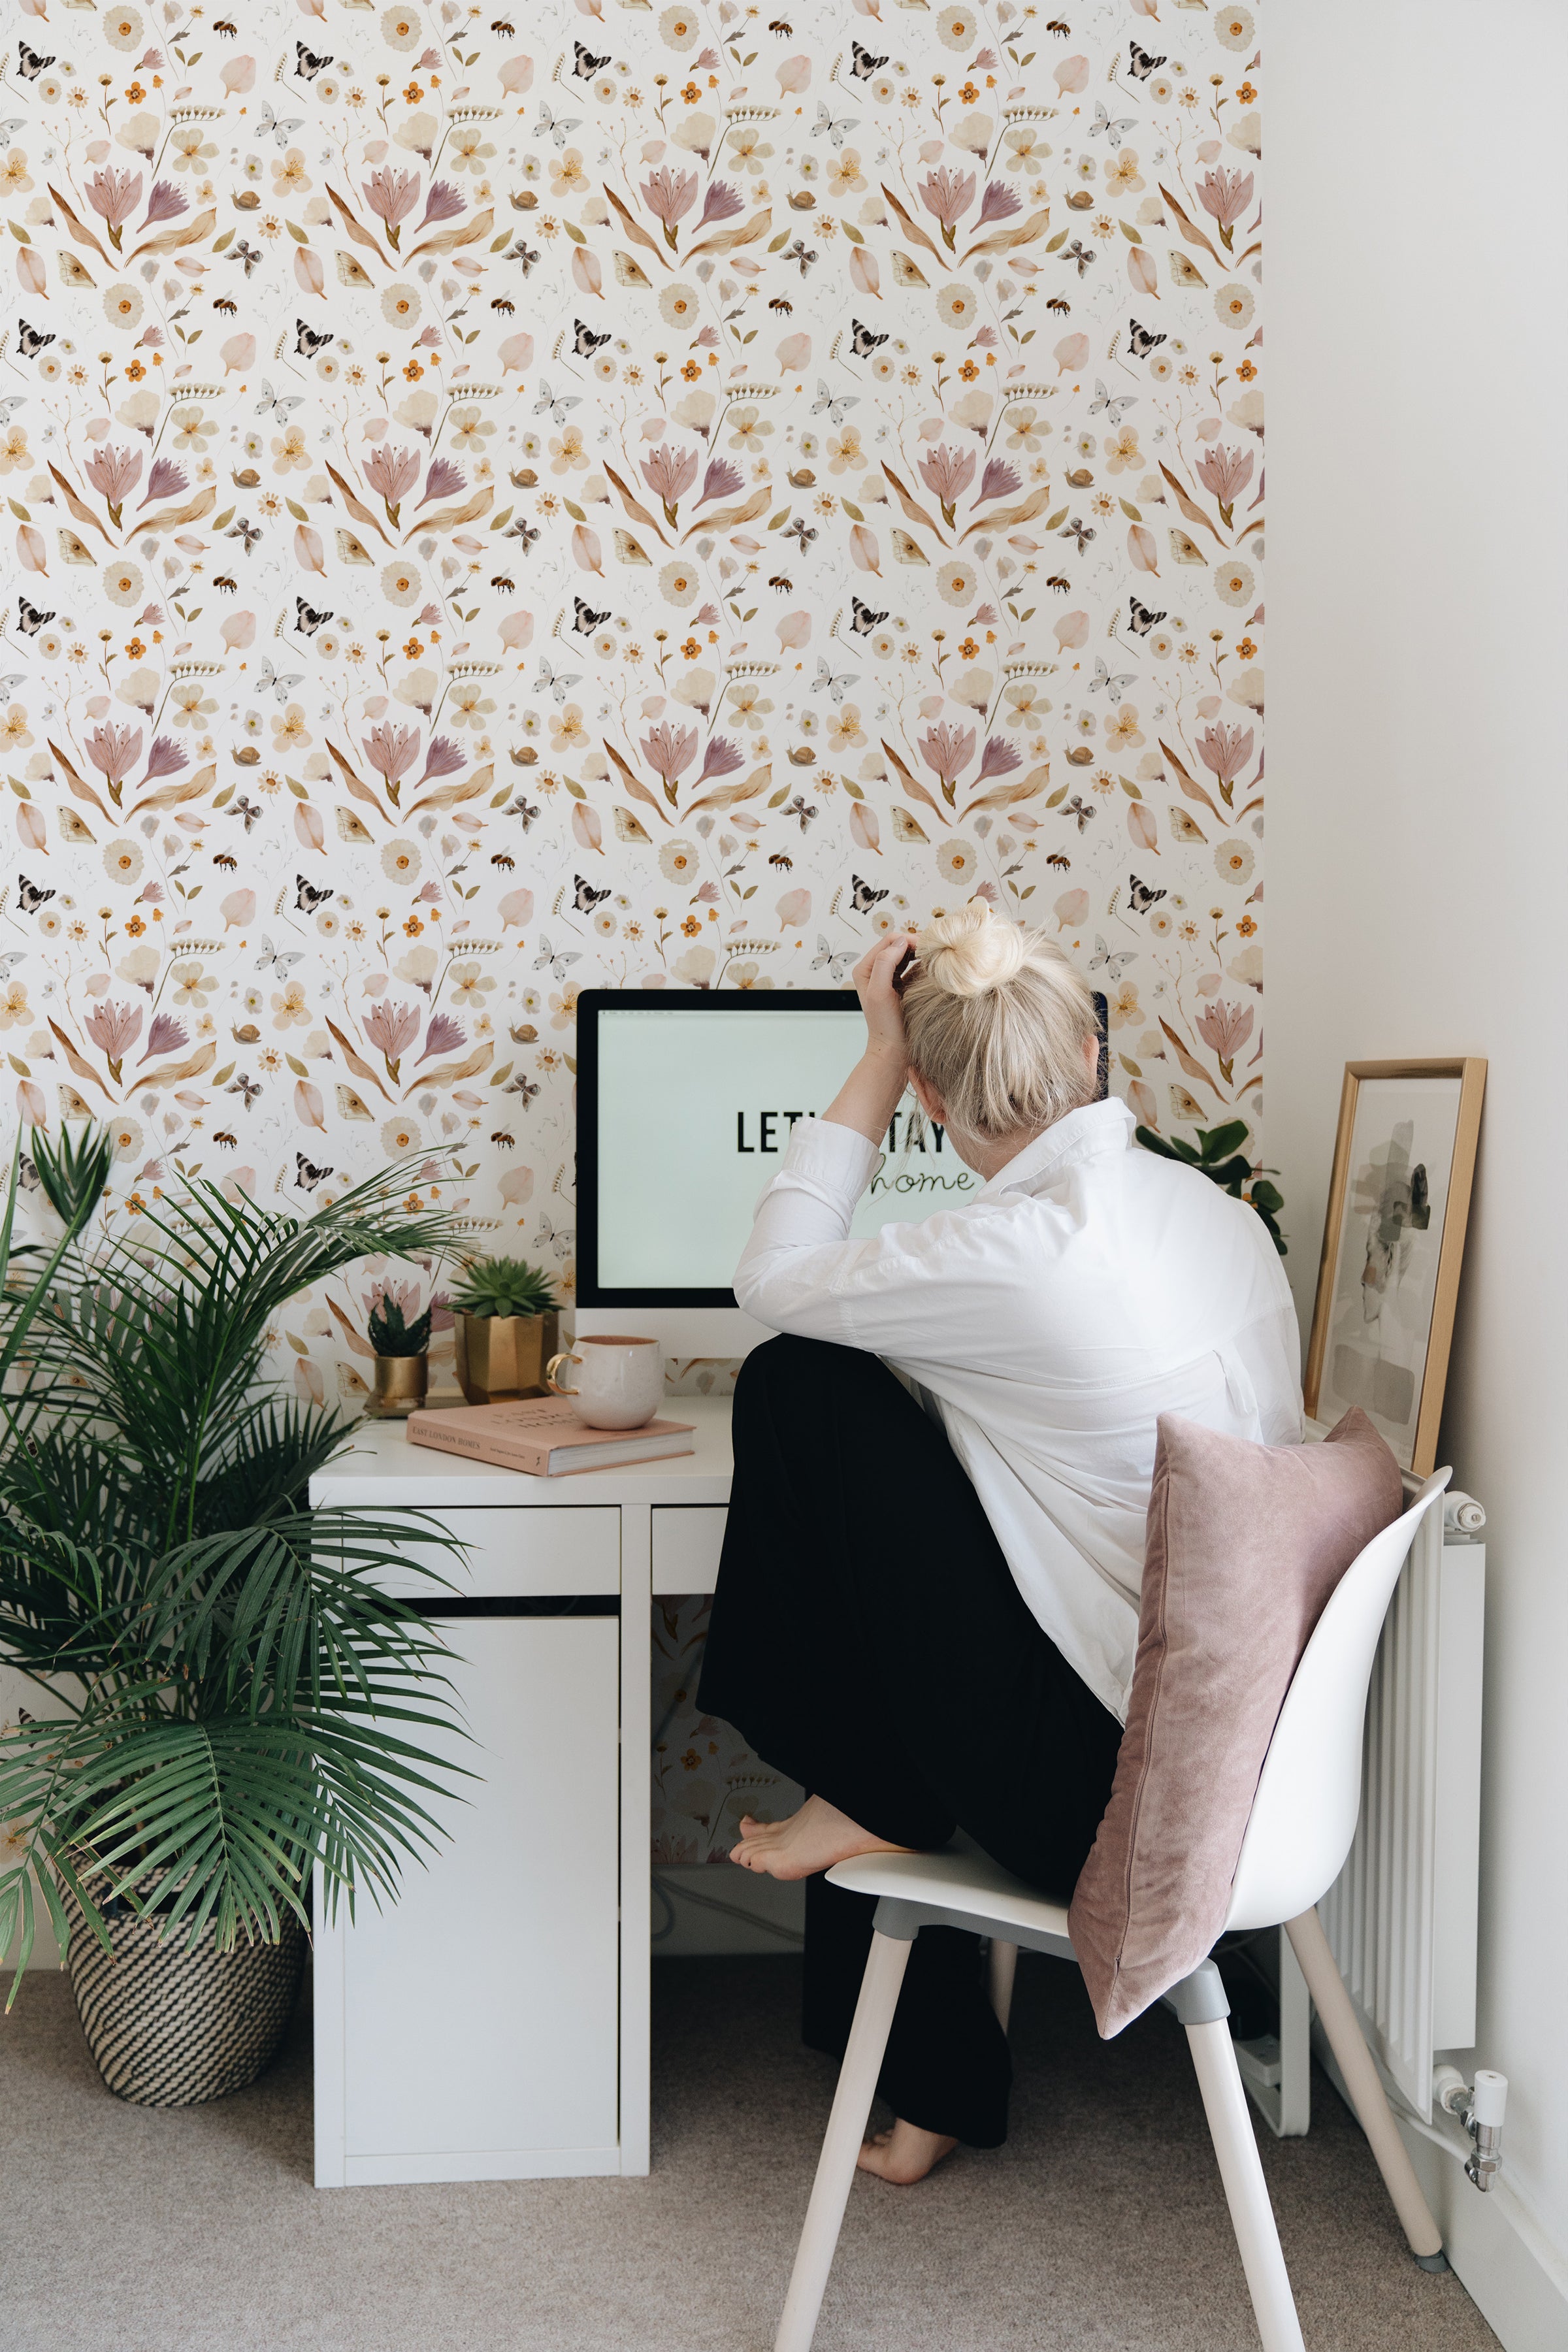 A vertical image capturing a cozy home office with the Boho Garden Wallpaper adorning the wall. The wallpaper features a vibrant pattern of watercolor wildflowers, leaves, and butterflies in shades of pink, gold, and green. A person with their back to the camera sits at a white desk, contemplating the wallpaper, amidst a peaceful setting with indoor plants and soft, natural lighting.